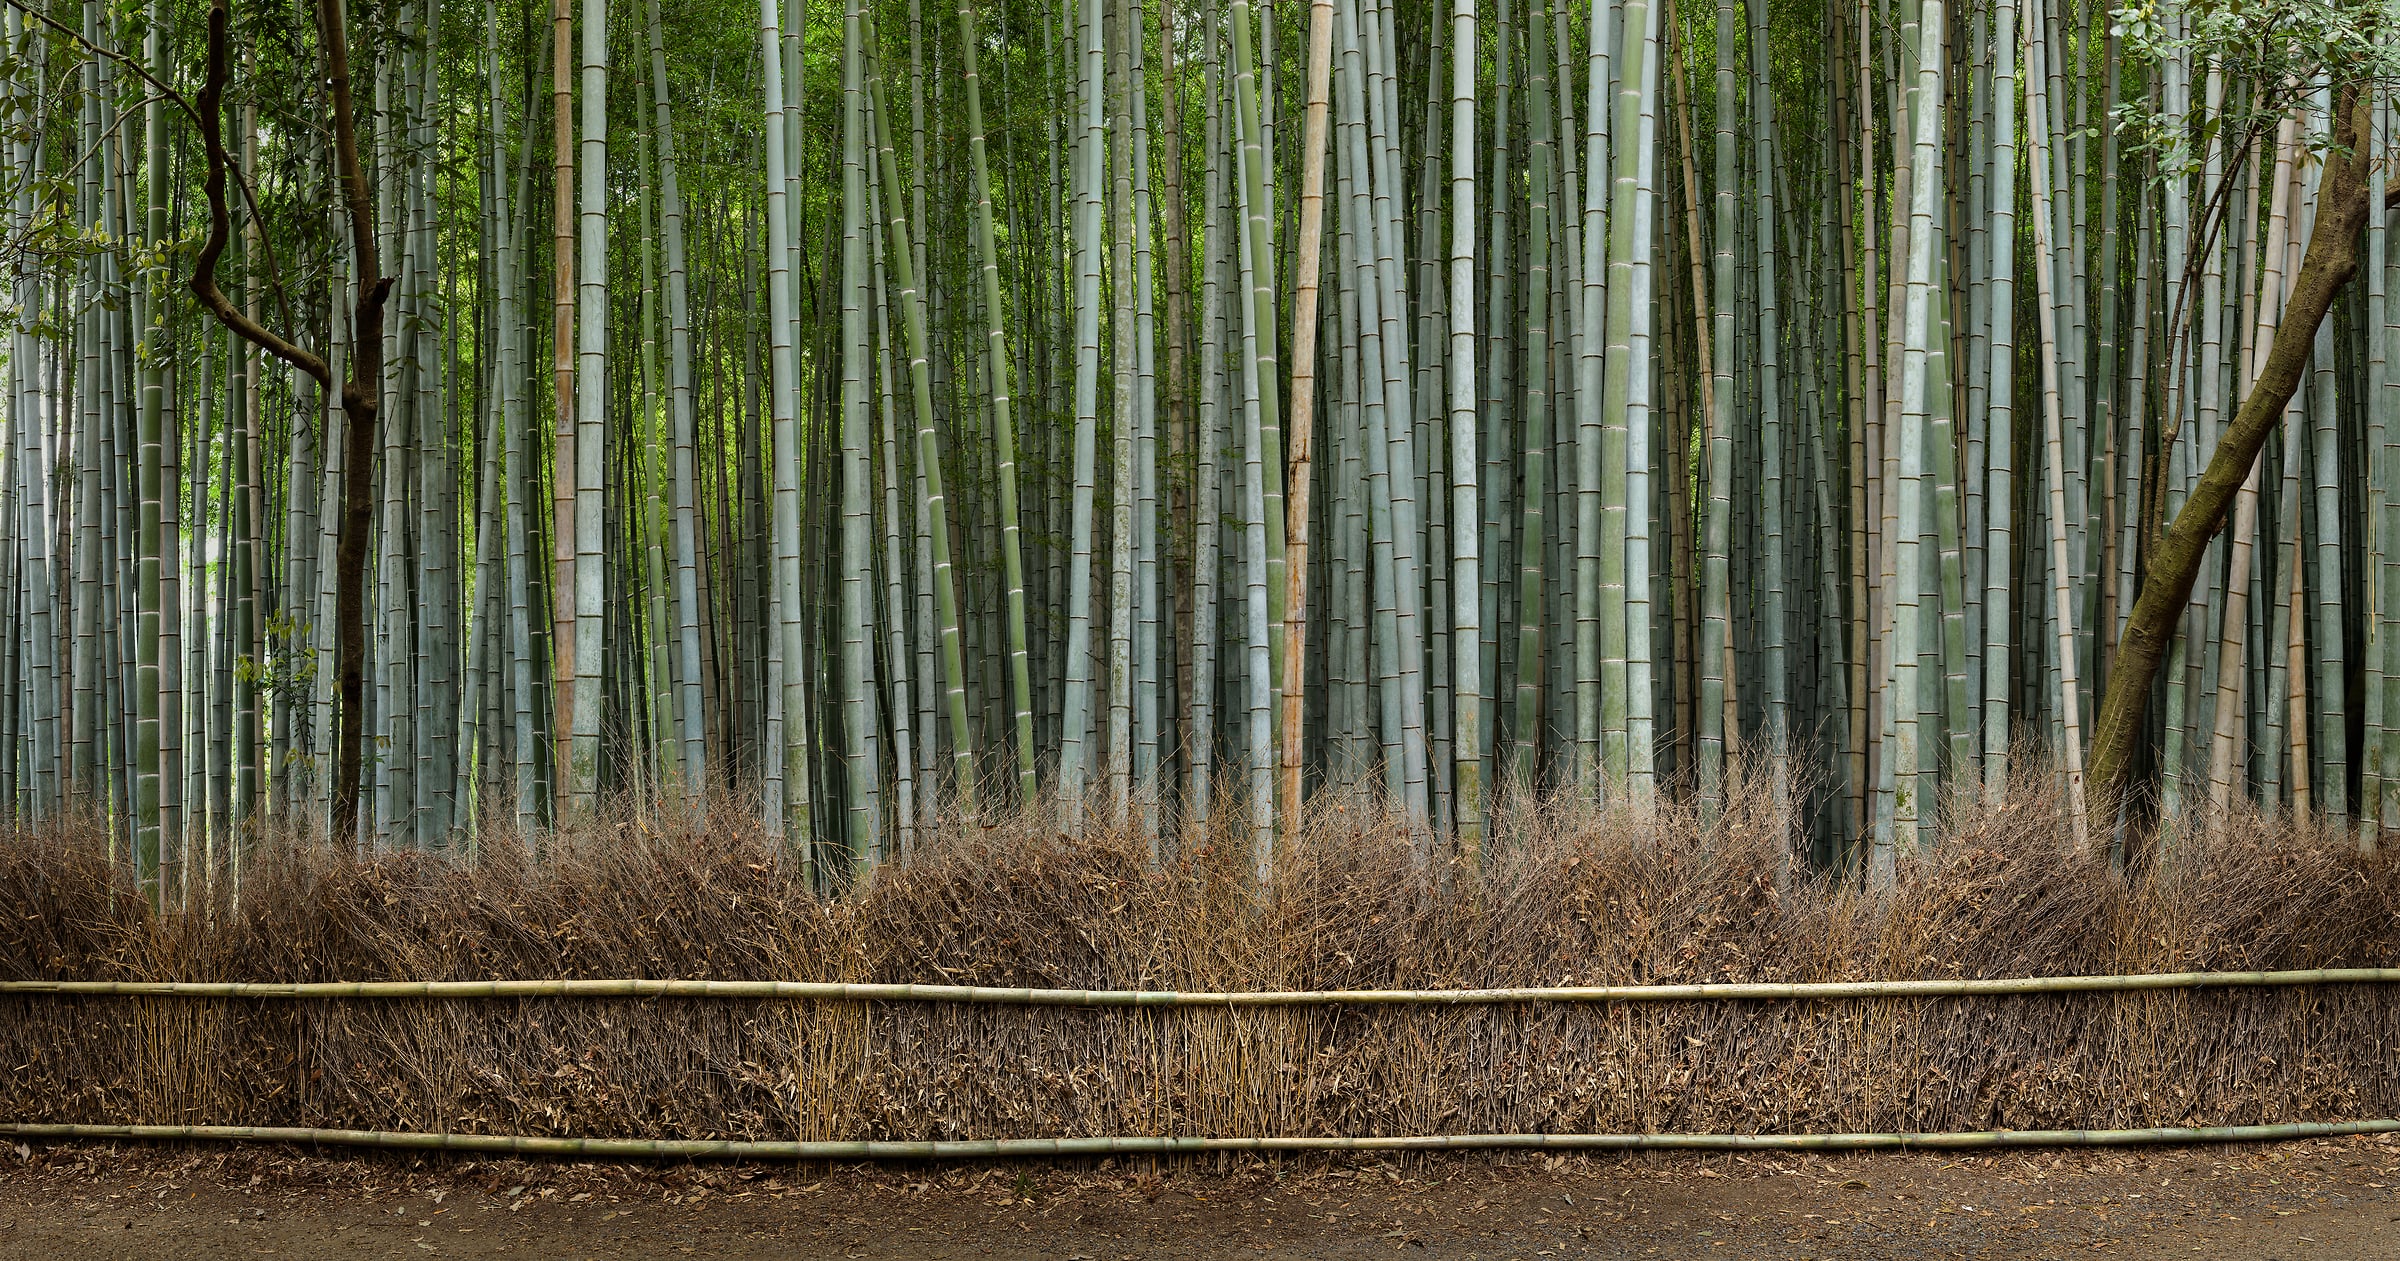 1,134 megapixels! A very high resolution VAST photo of a bamboo forest perfect for a wallpaper in a home or office; nature photograph created by Scott Dimond in Arashiyama Bamboo Grove, Ukyo Ward, Kyoto, Japan